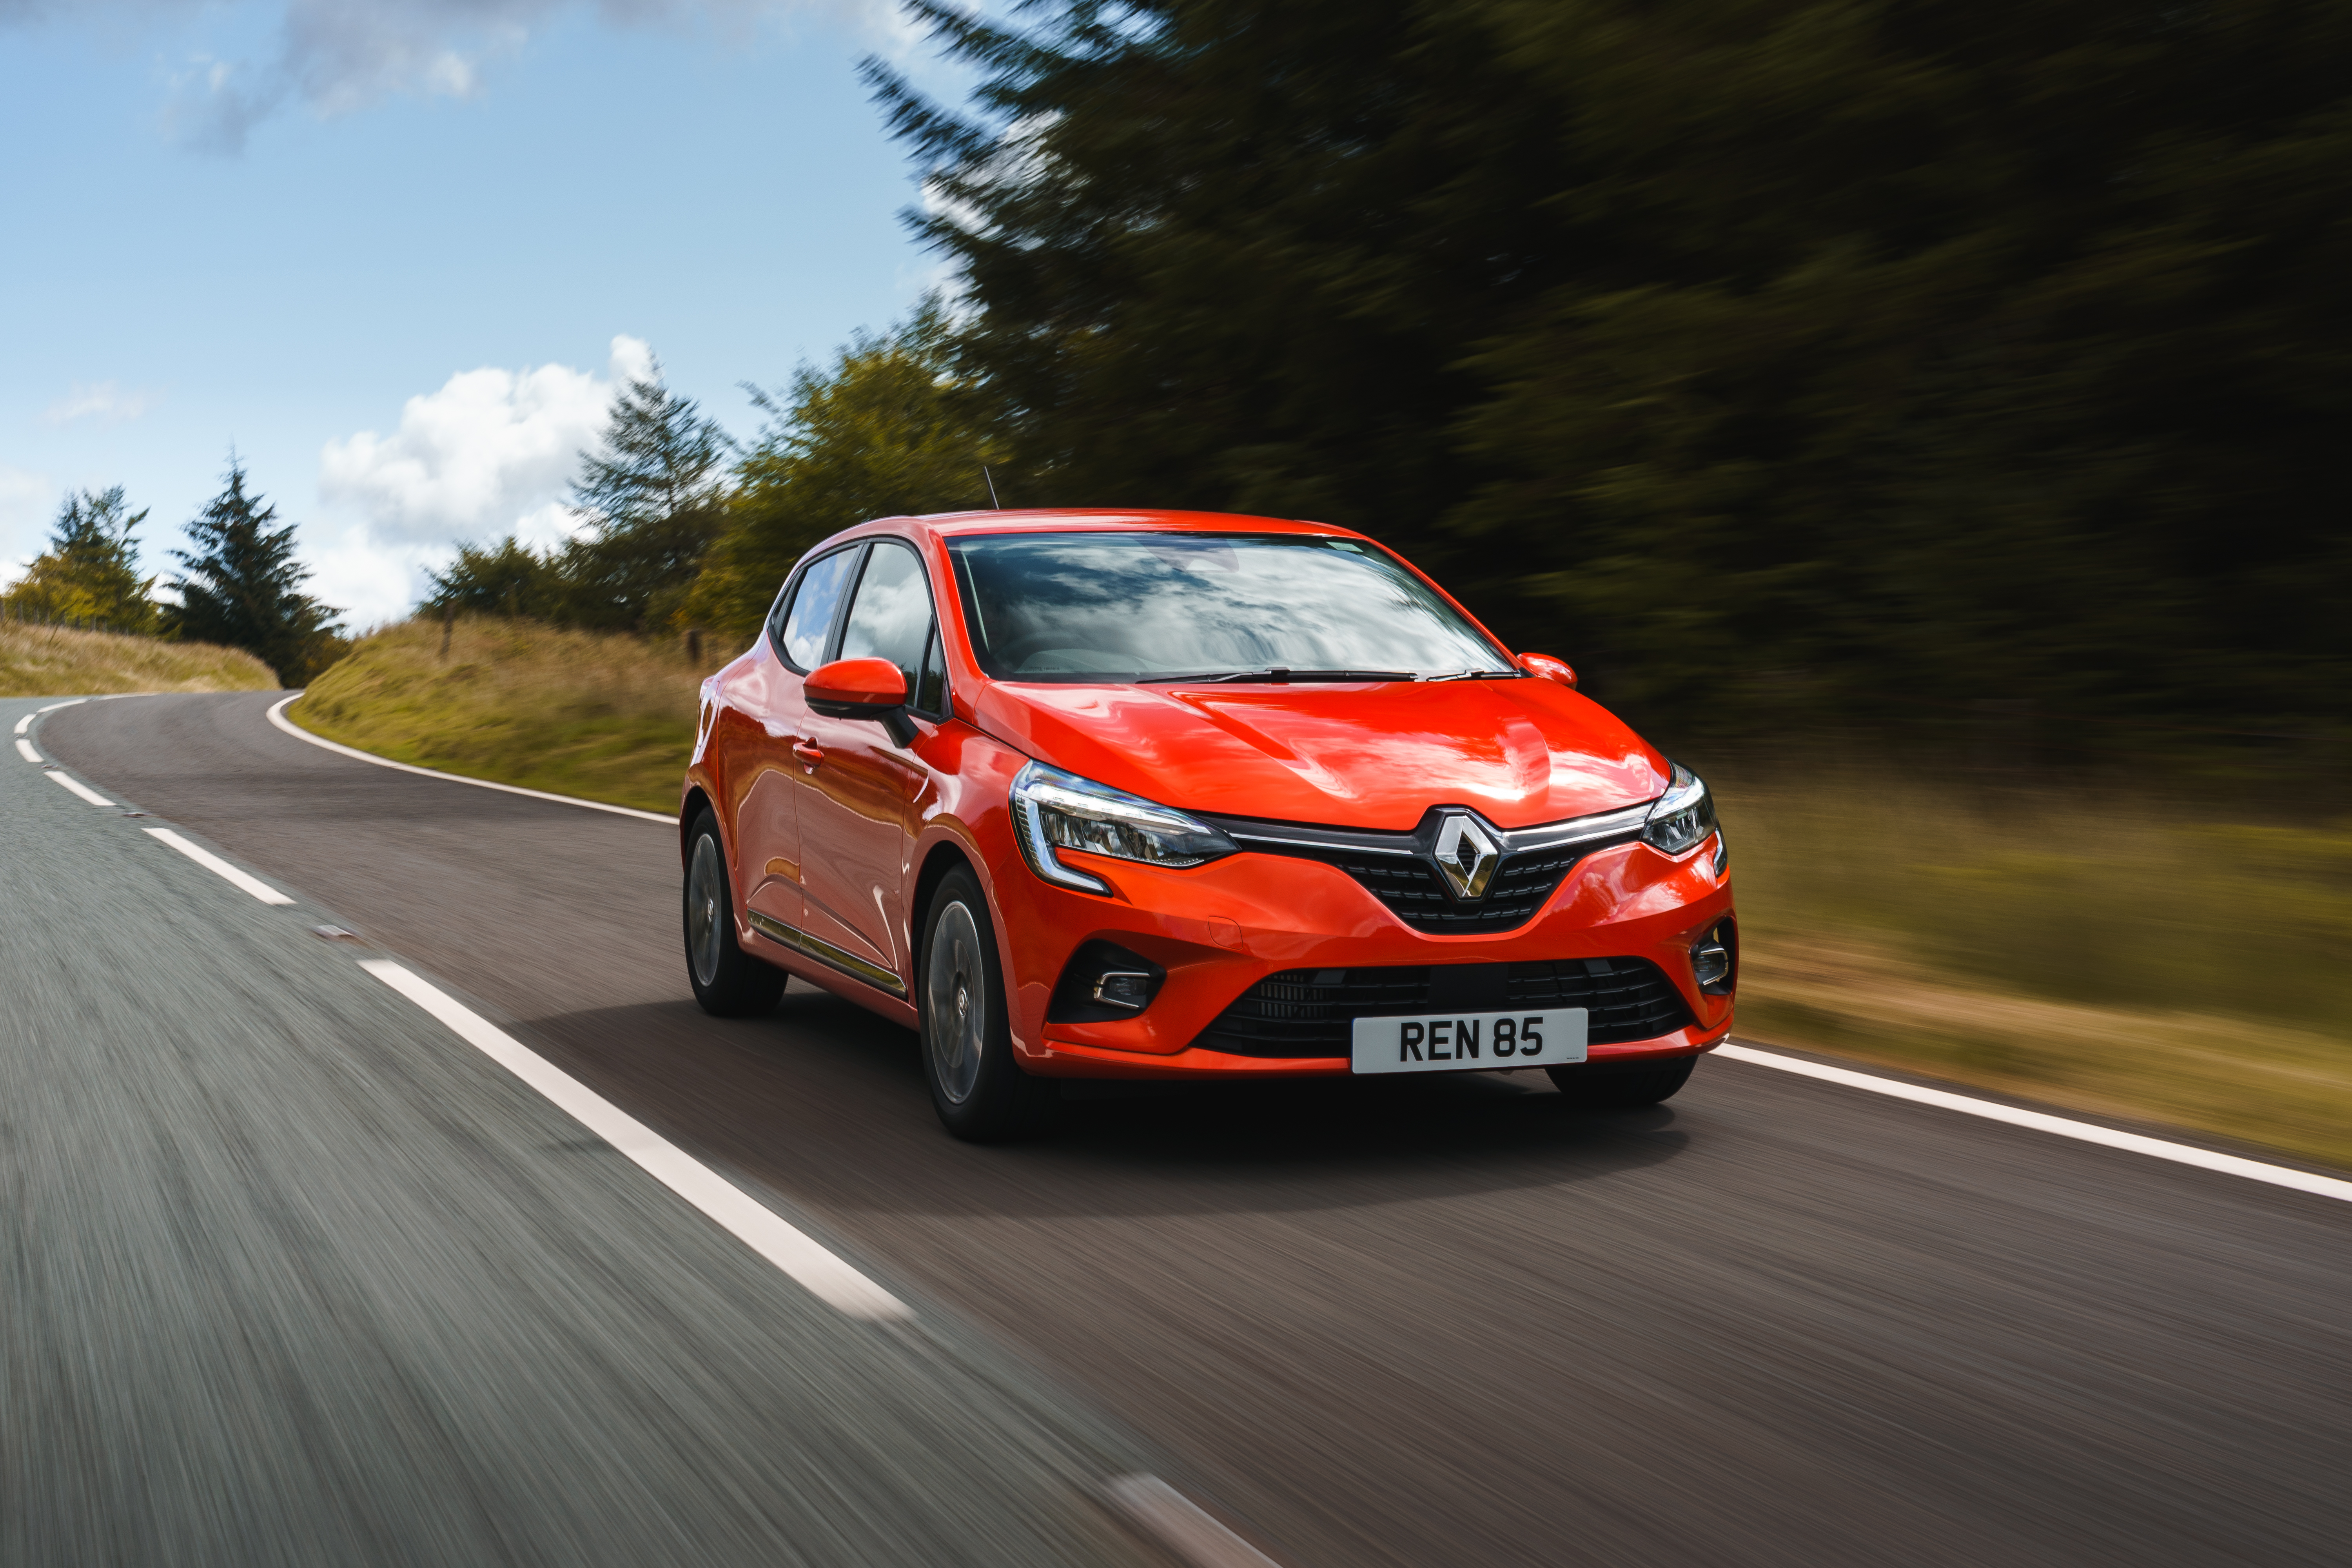 Renault Clio Problems: Common Faults and Repair Costs - WhoCanFixMyCar